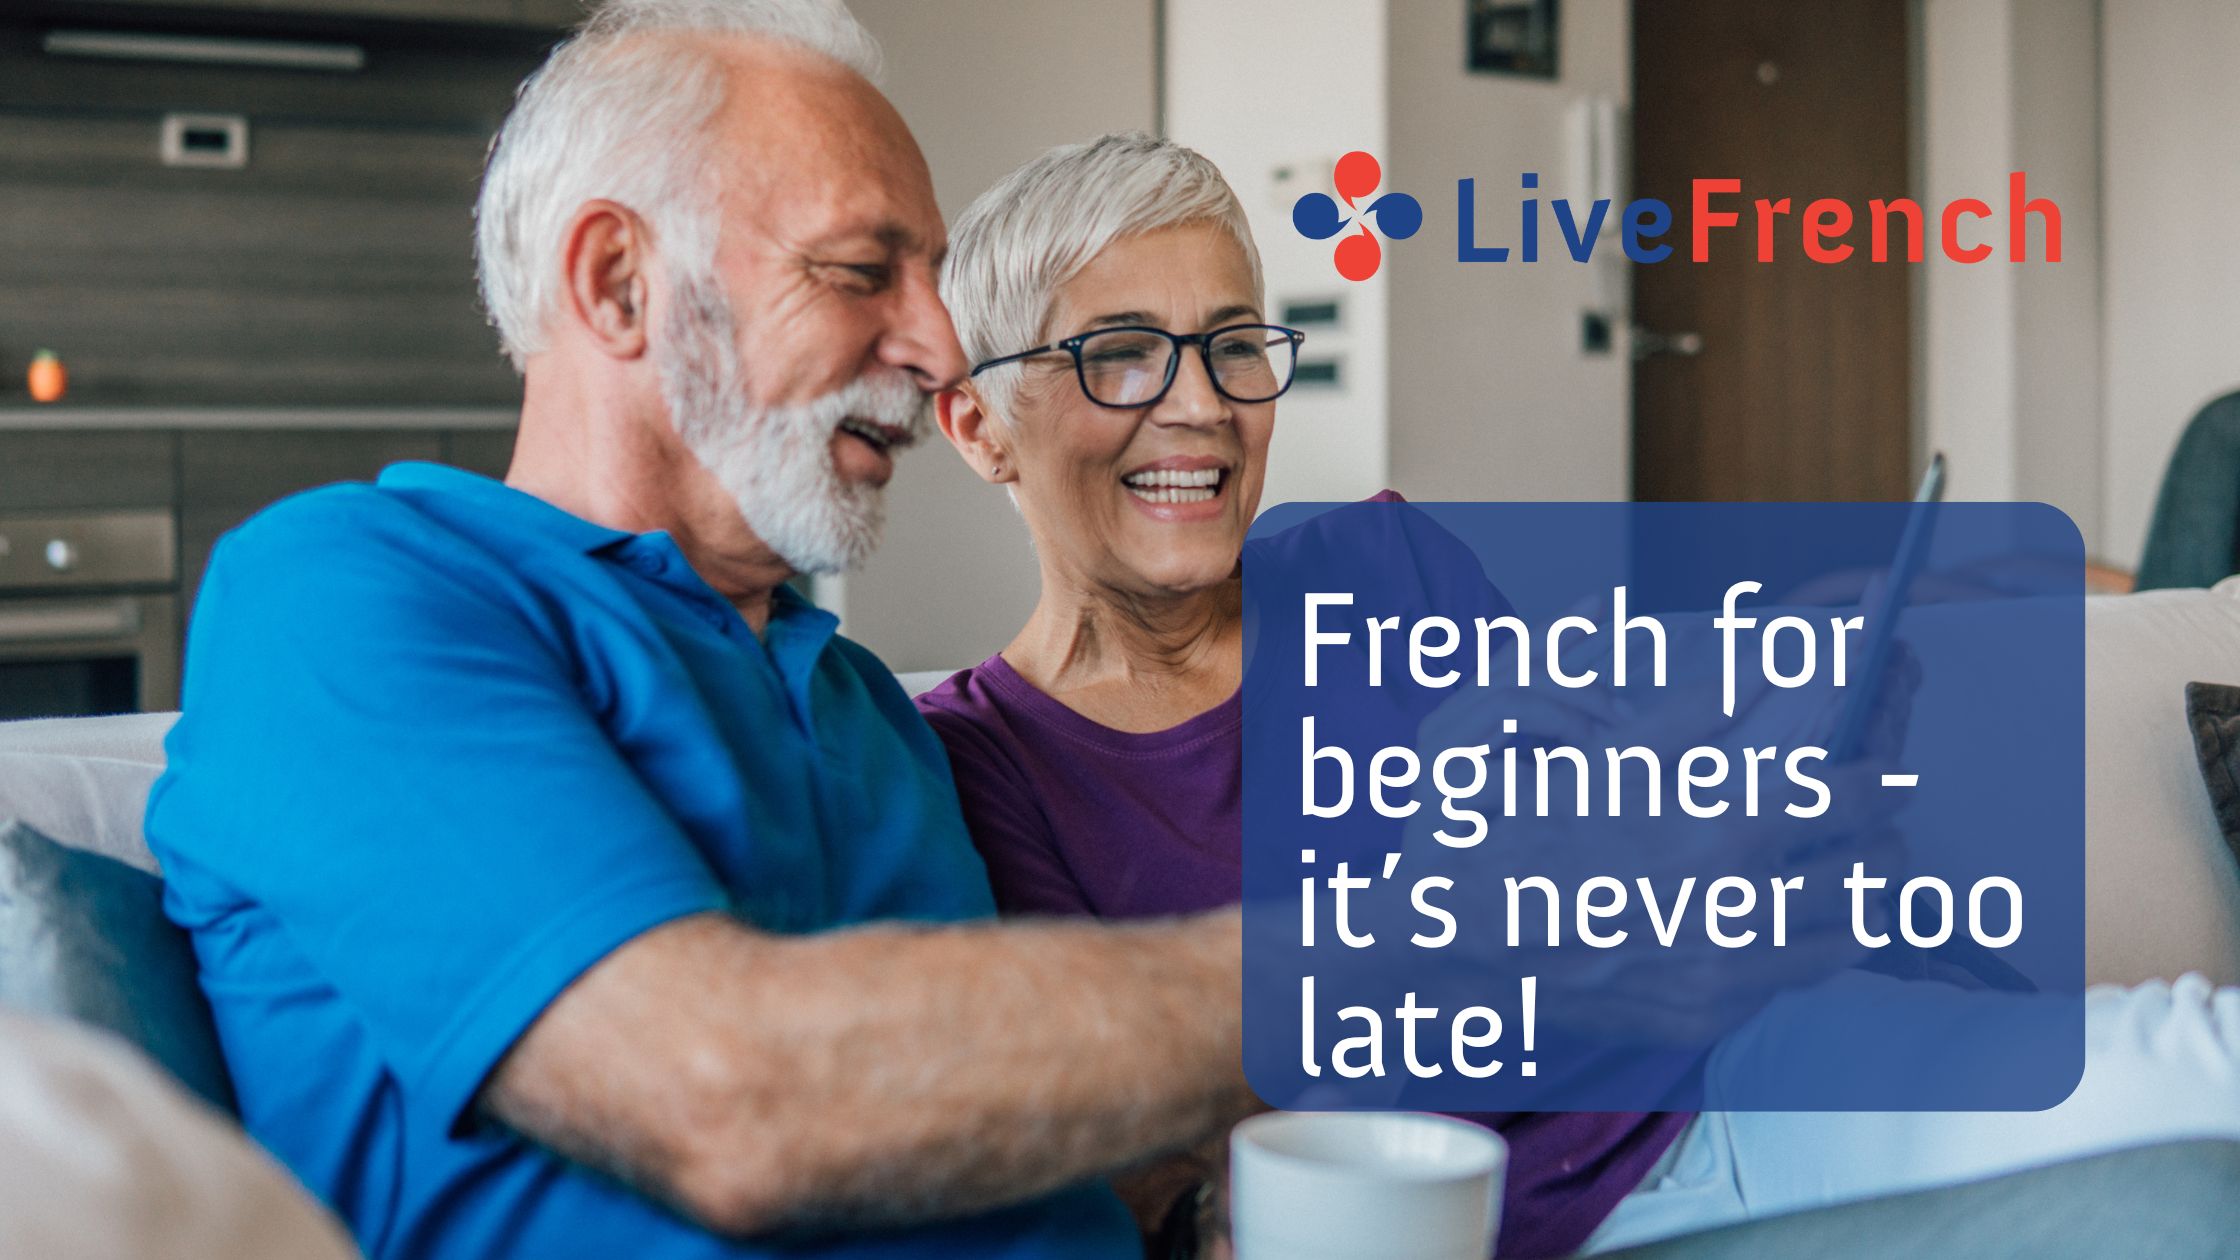 Take a French for beginners’ course,  it’s never too late!